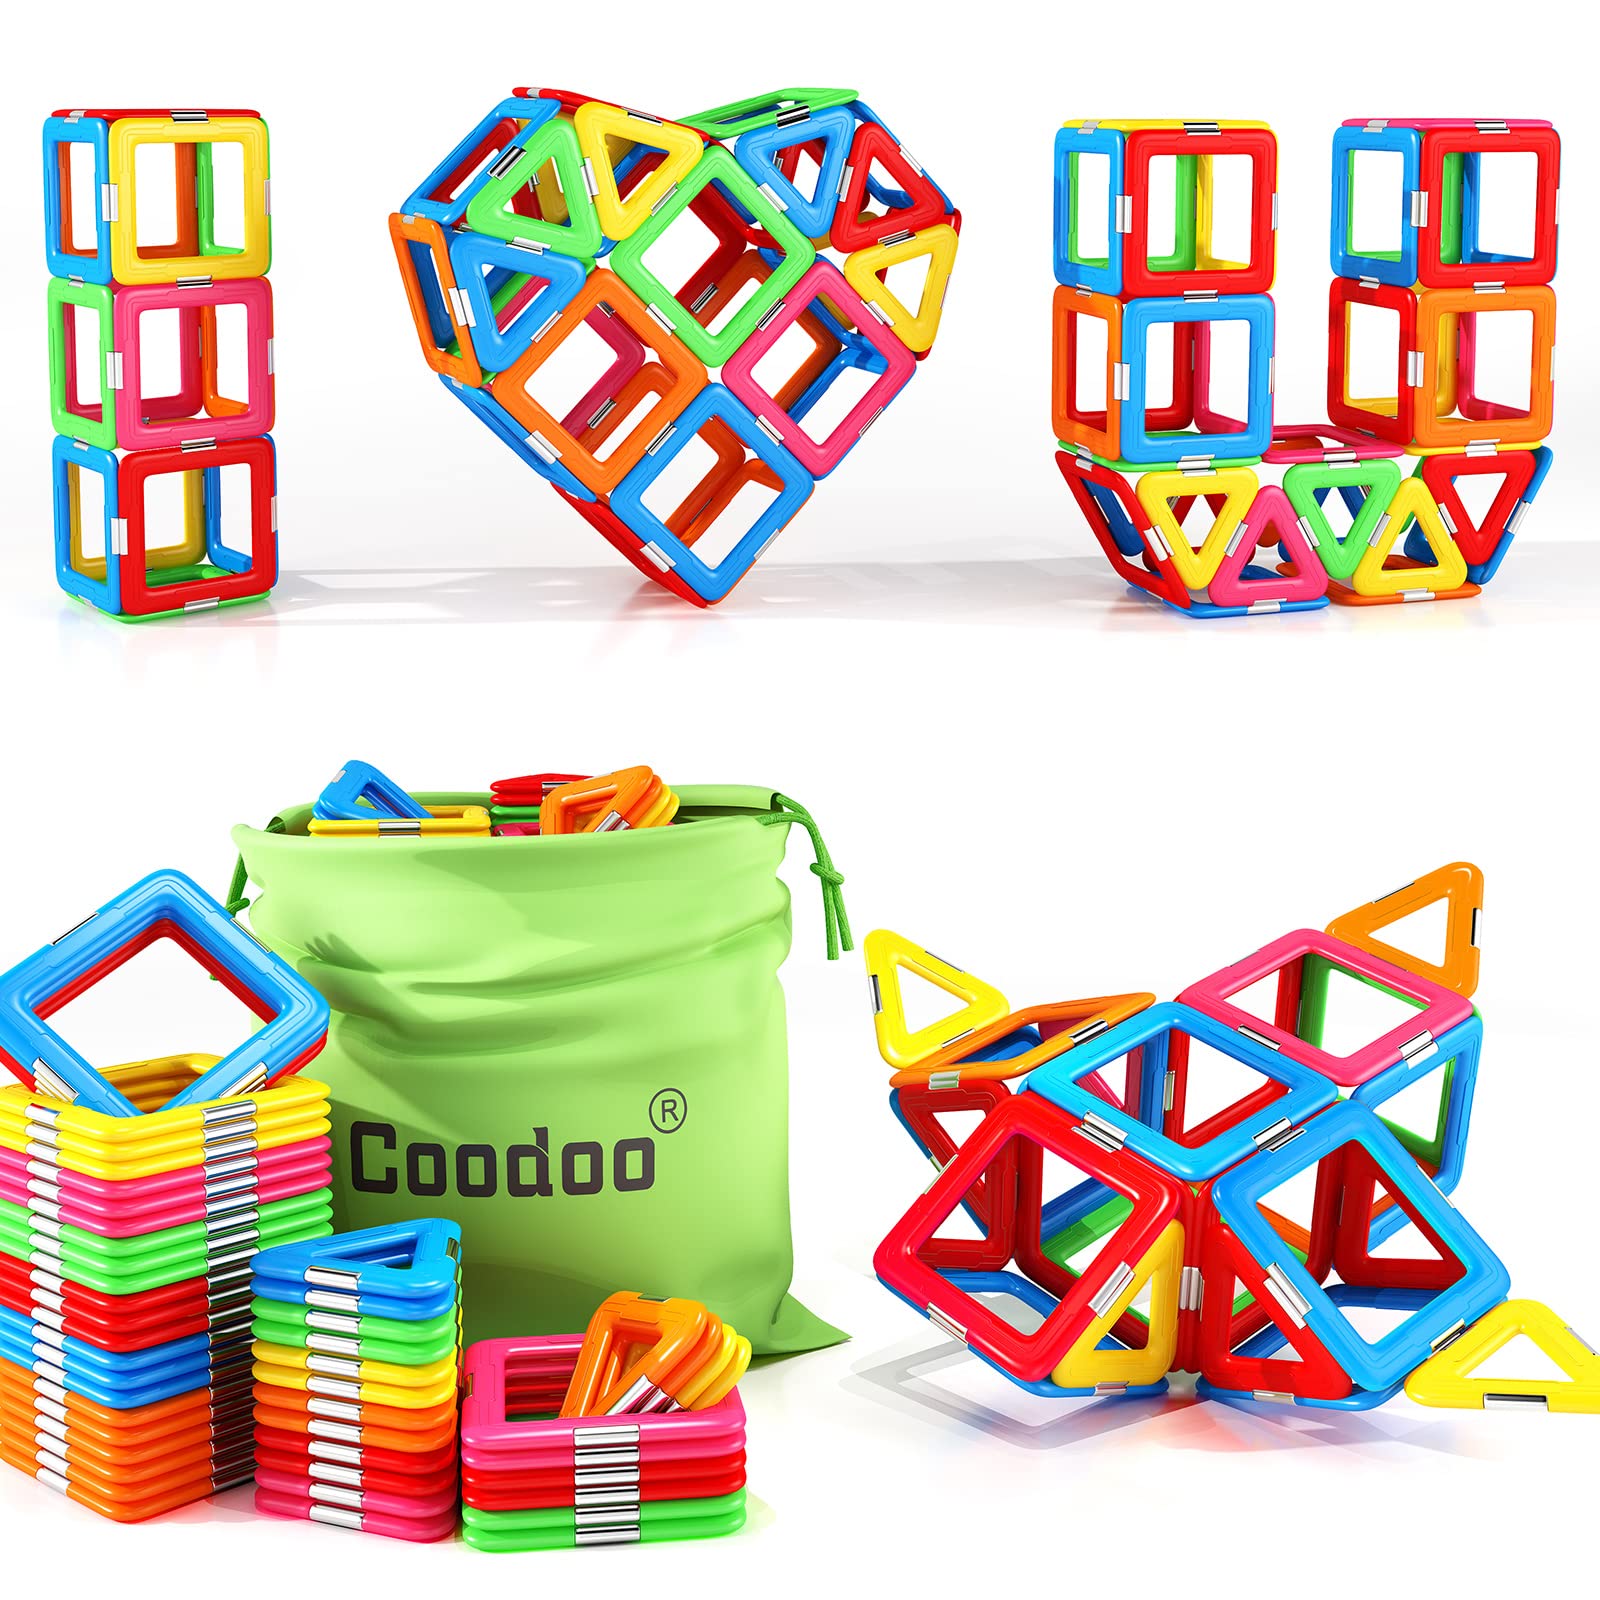 Coodoo Upgraded Magnetic Blocks Tough Tiles STEM Toys for 3+ Year Old Boys and Girls Learning by Playing Games for Toddlers Kids, Compatible with Major Brands Building Blocks - Starter Set